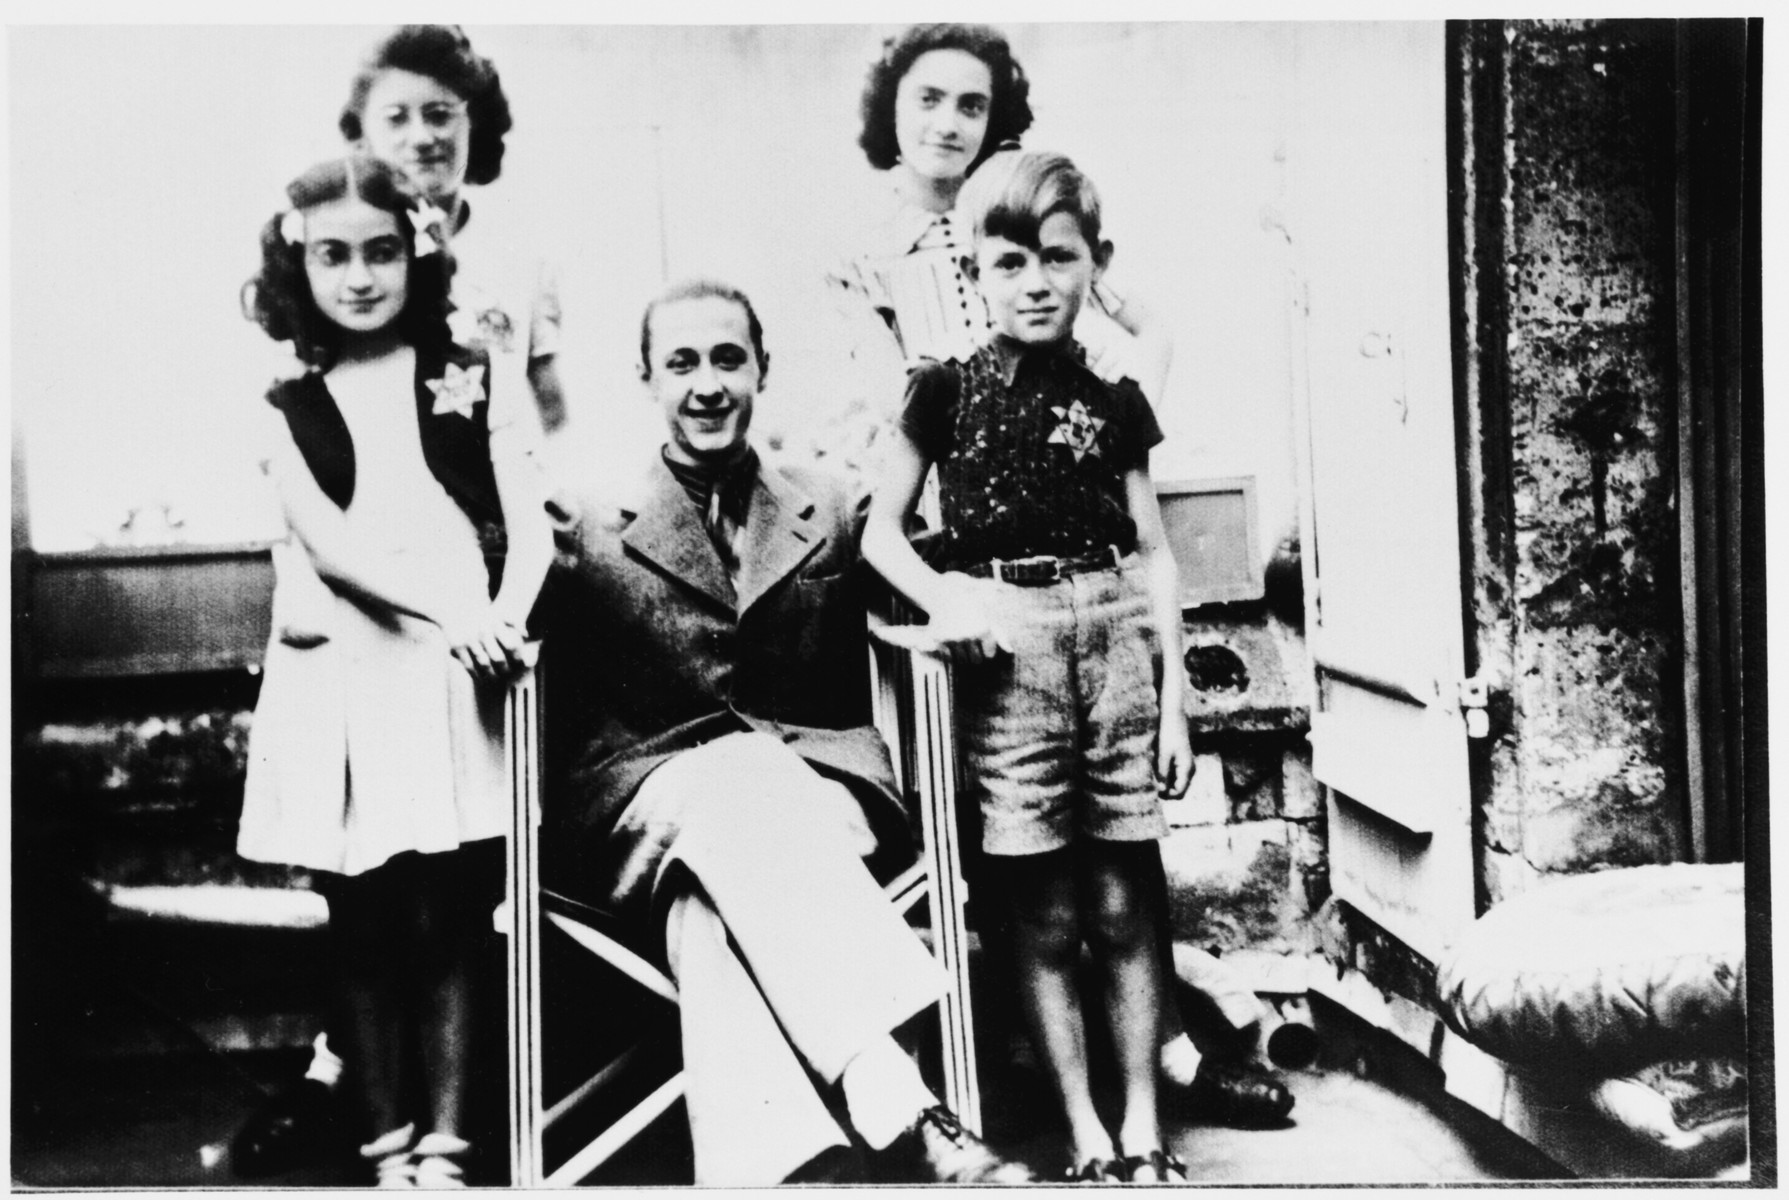 Group portrait of French Jewish children wearing a Jewish star.

Among those pictured are Paulette and Ruth Apfel and Roger Vinnitsky.